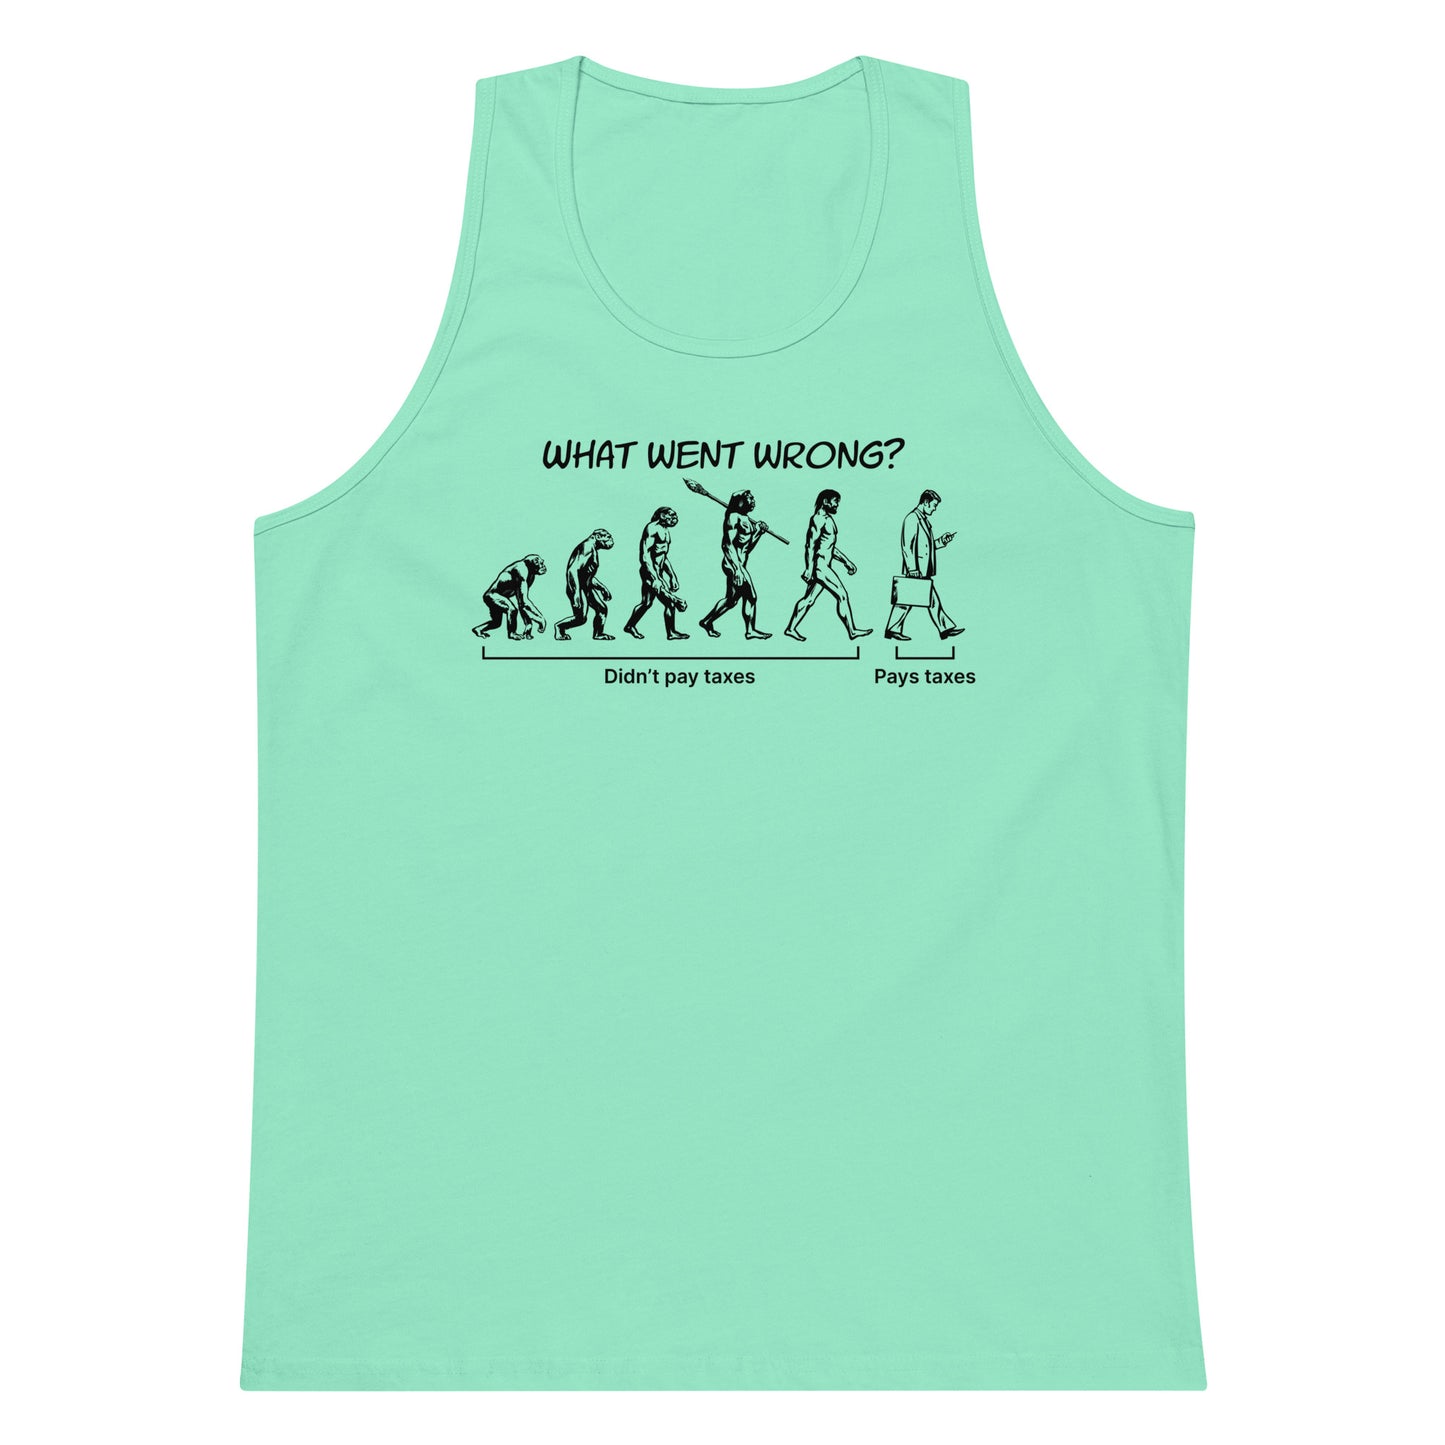 What Went Wrong (Taxes) tank top